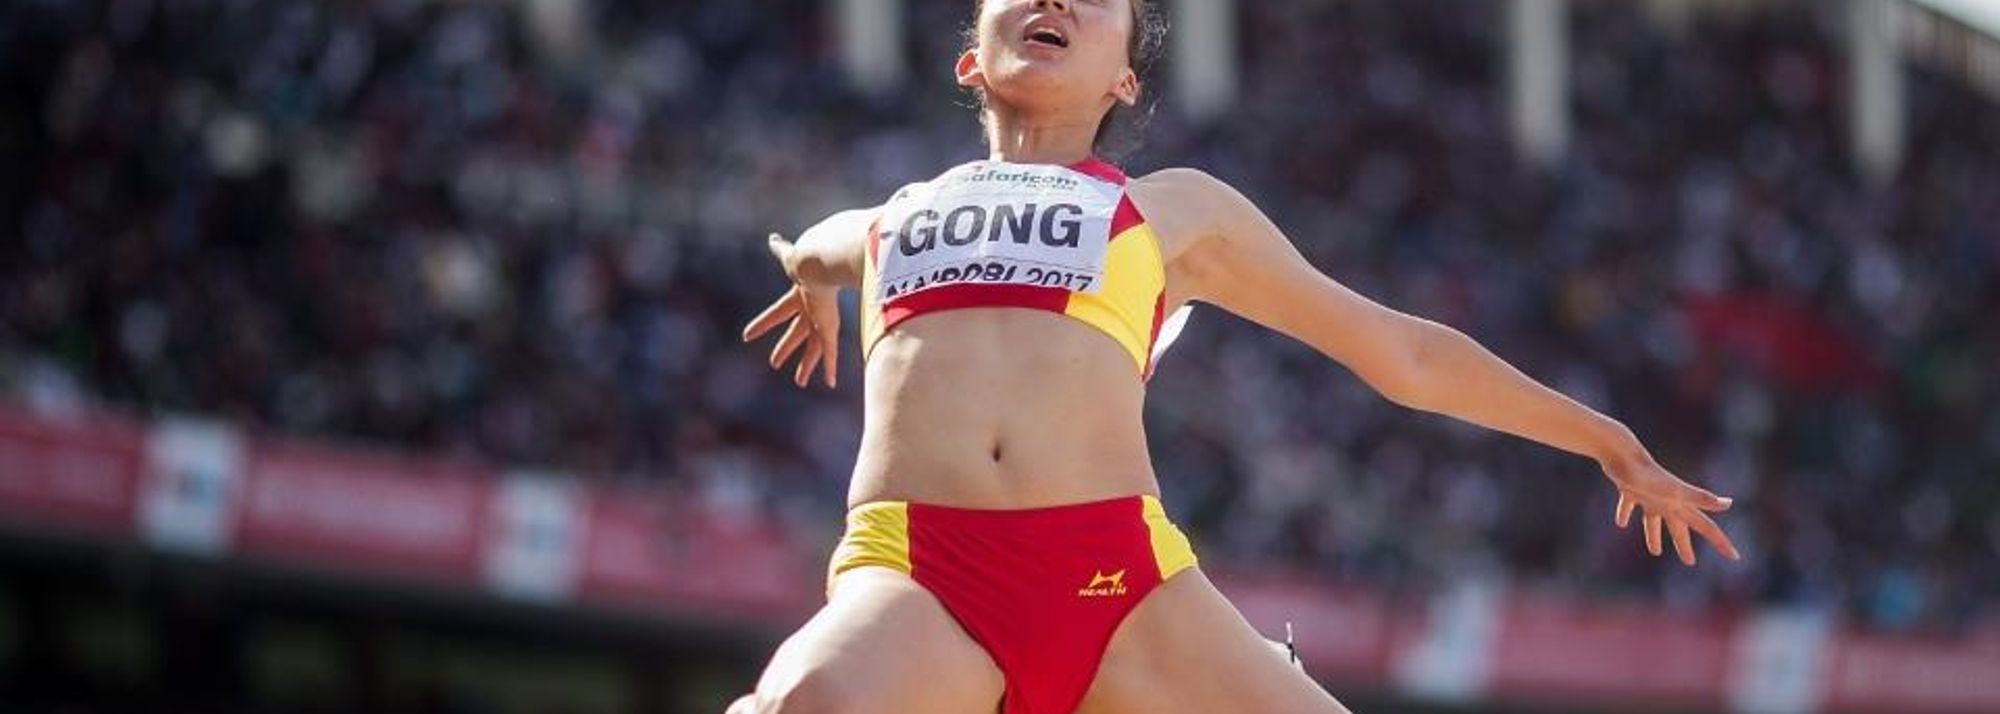 Though she has displayed tremendous ability in two athletics disciplines, rising star Gong Luying is likely to direct much of her focus towards the long jump for the foreseeable future in an attempt to help her province close the gap on their compatriots in one of China's best track and field events.